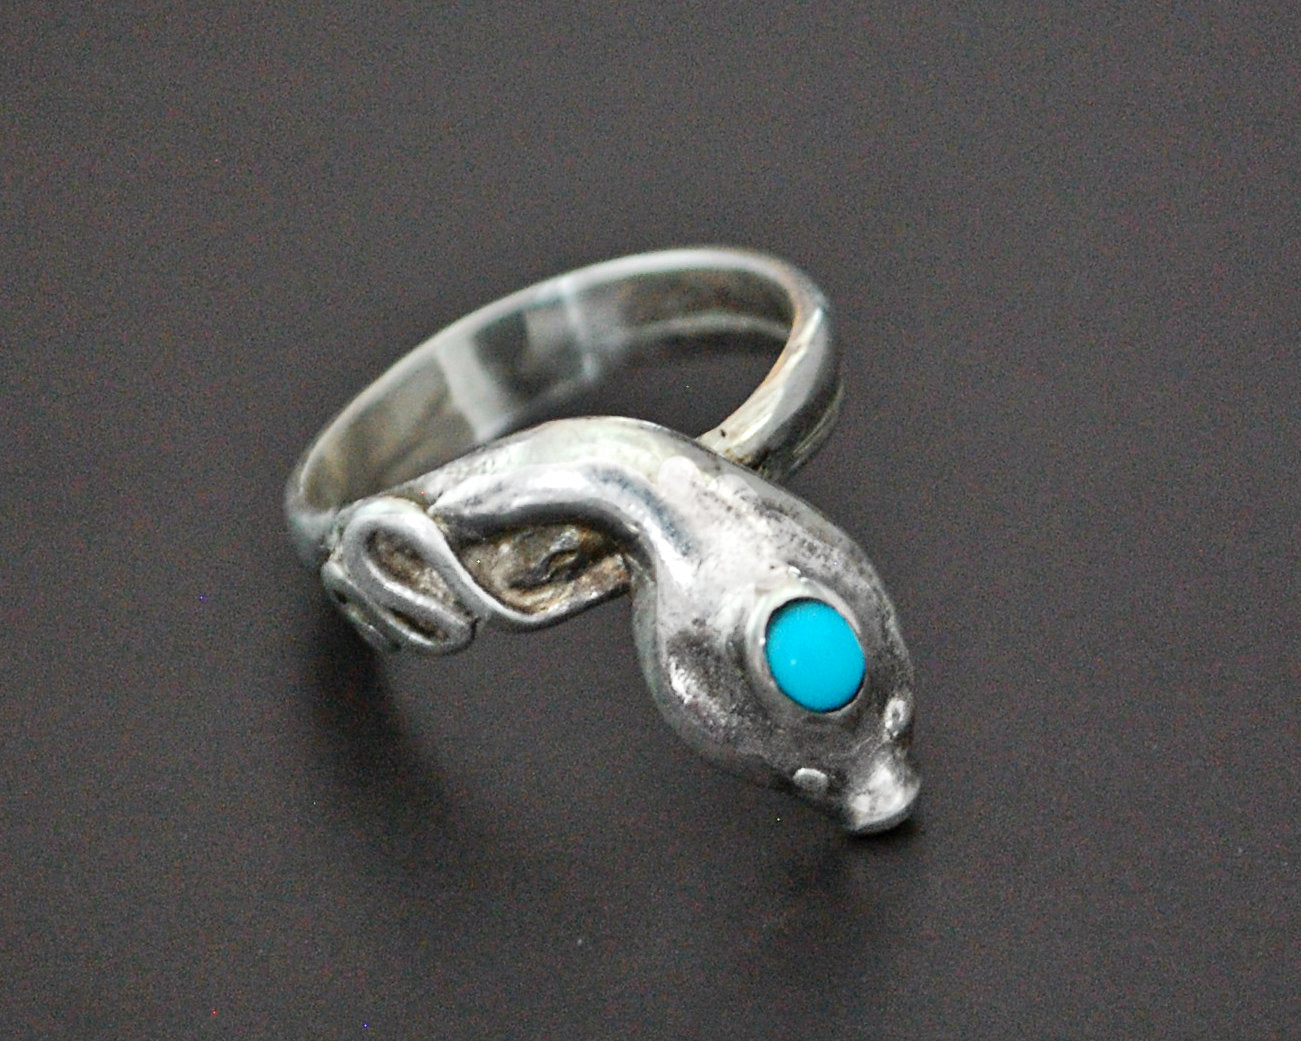 Snake Ring with Turquoise - Size 5.5